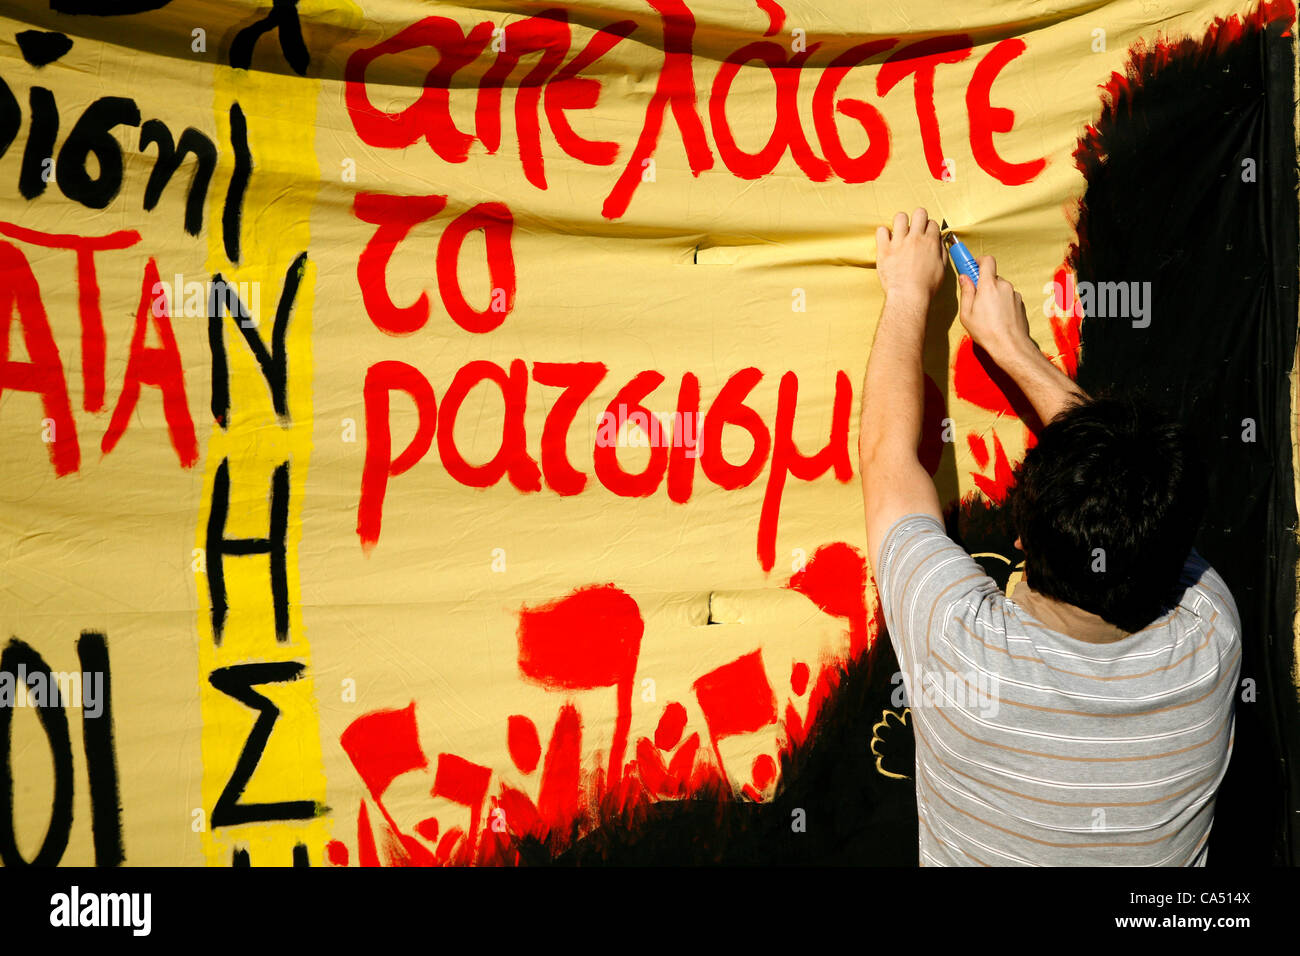 June 8, 2012. Thessaloniki, Greece. Antifascist protest against the extreme-right Golden Dawn party and fascist attacks. Stock Photo